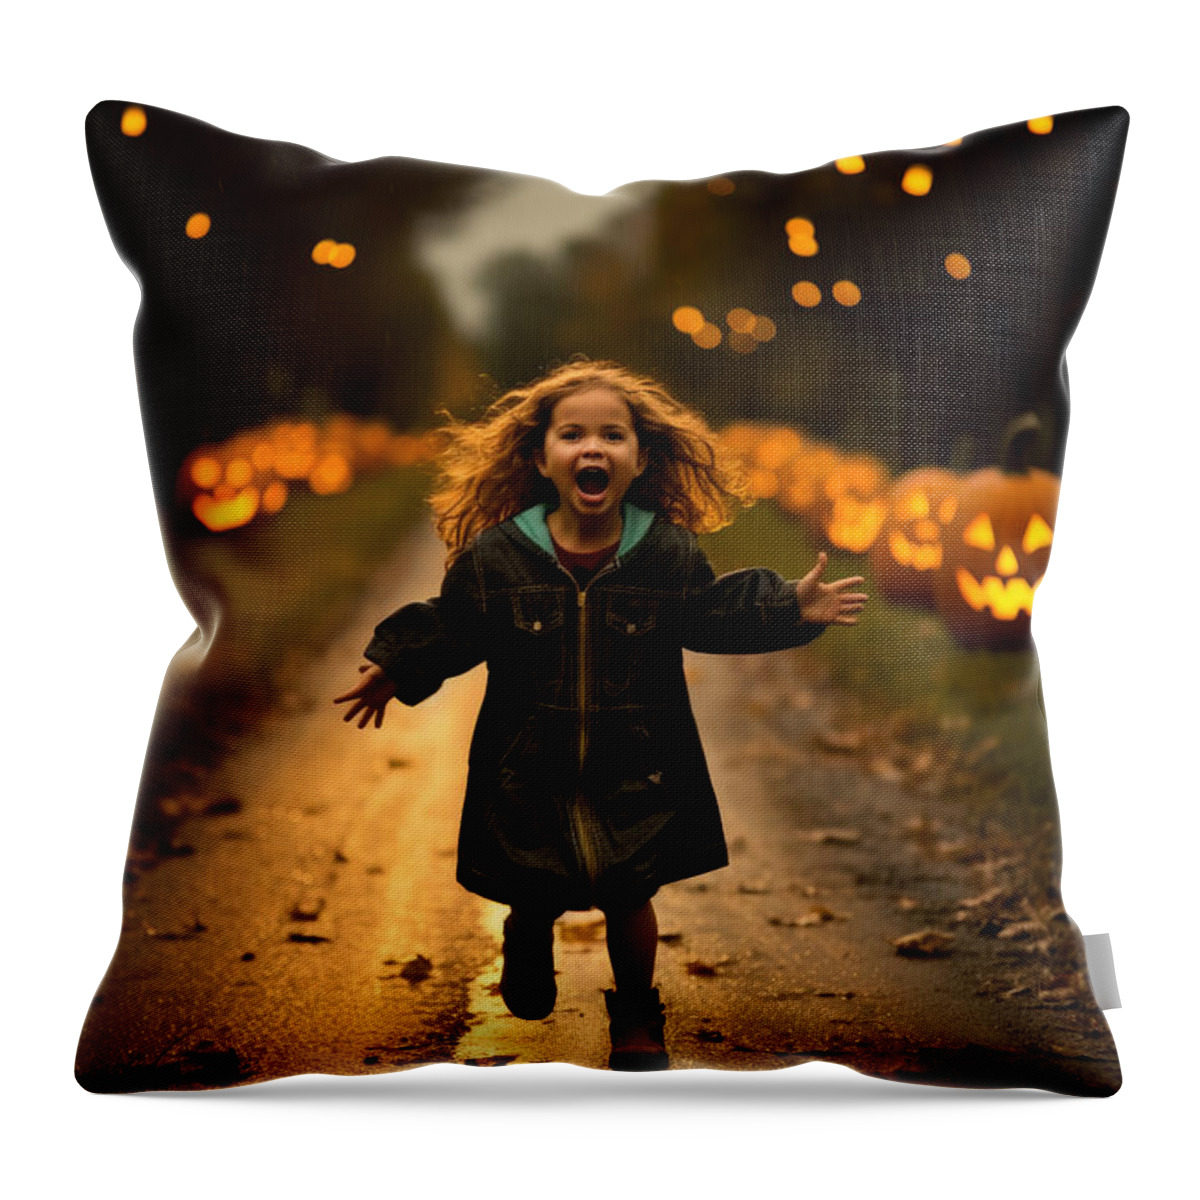 Scary Throw Pillow featuring the photograph Scary Halloween by My Head Cinema